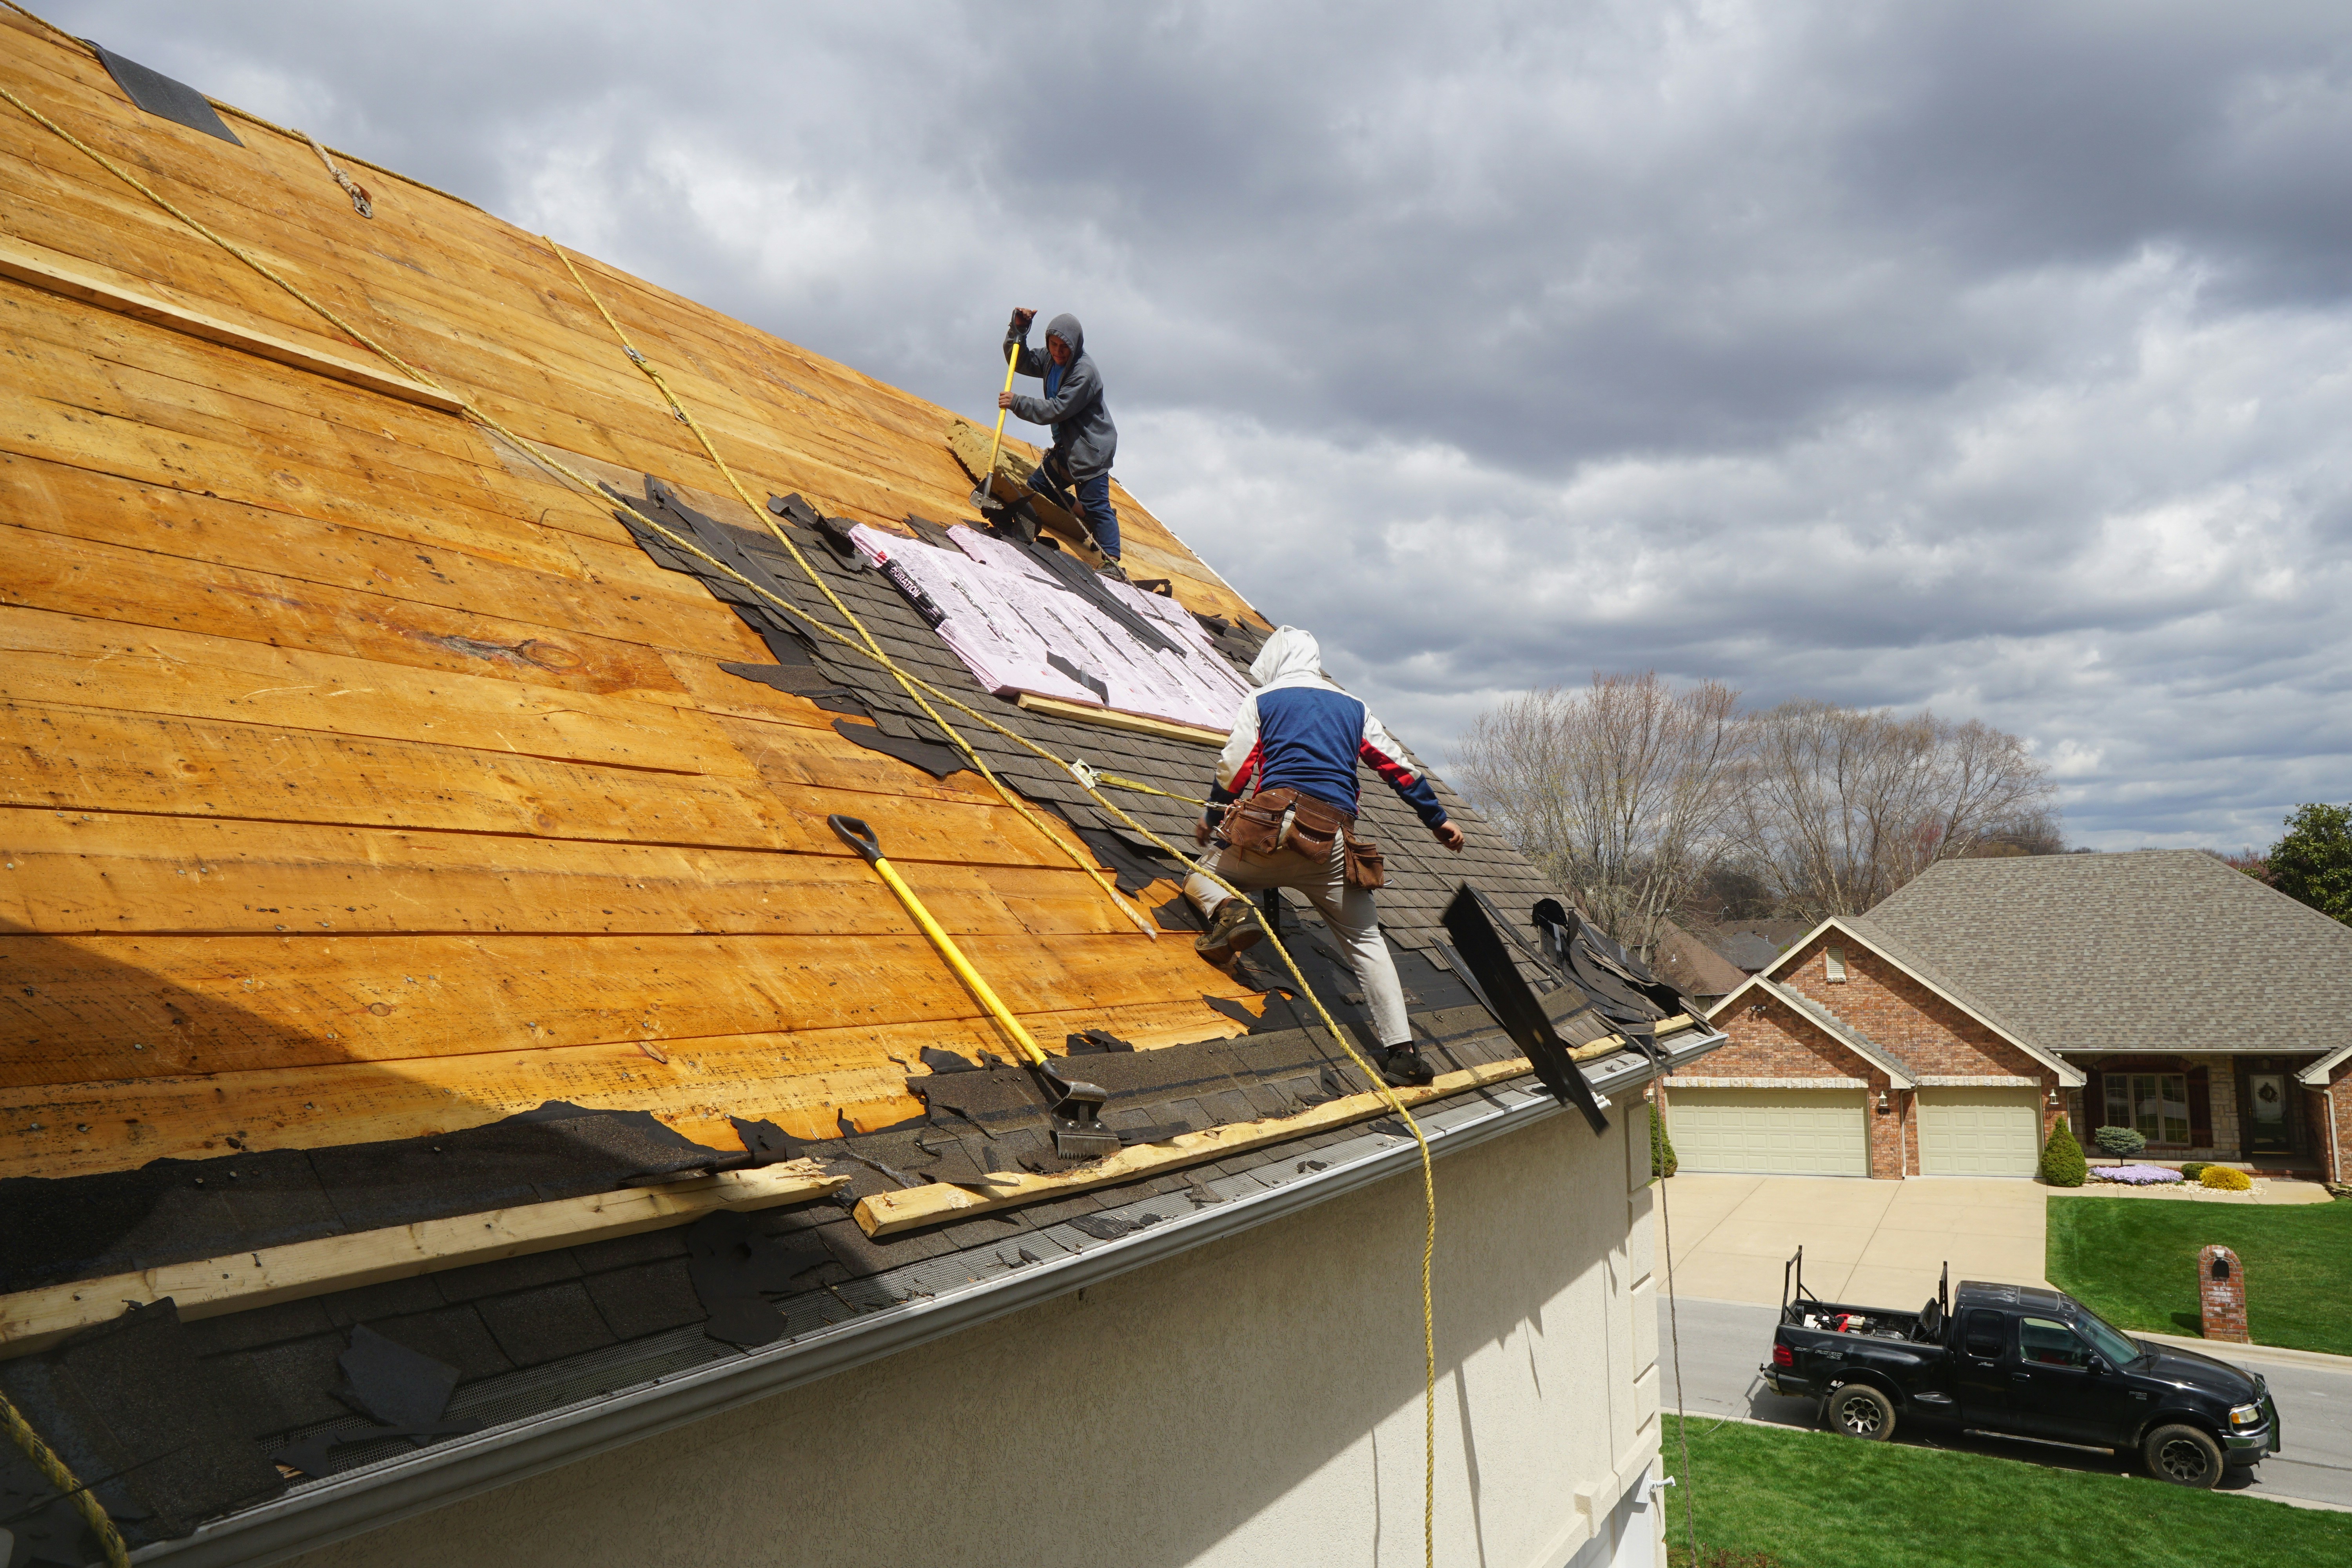 Does your home need a roof replacement